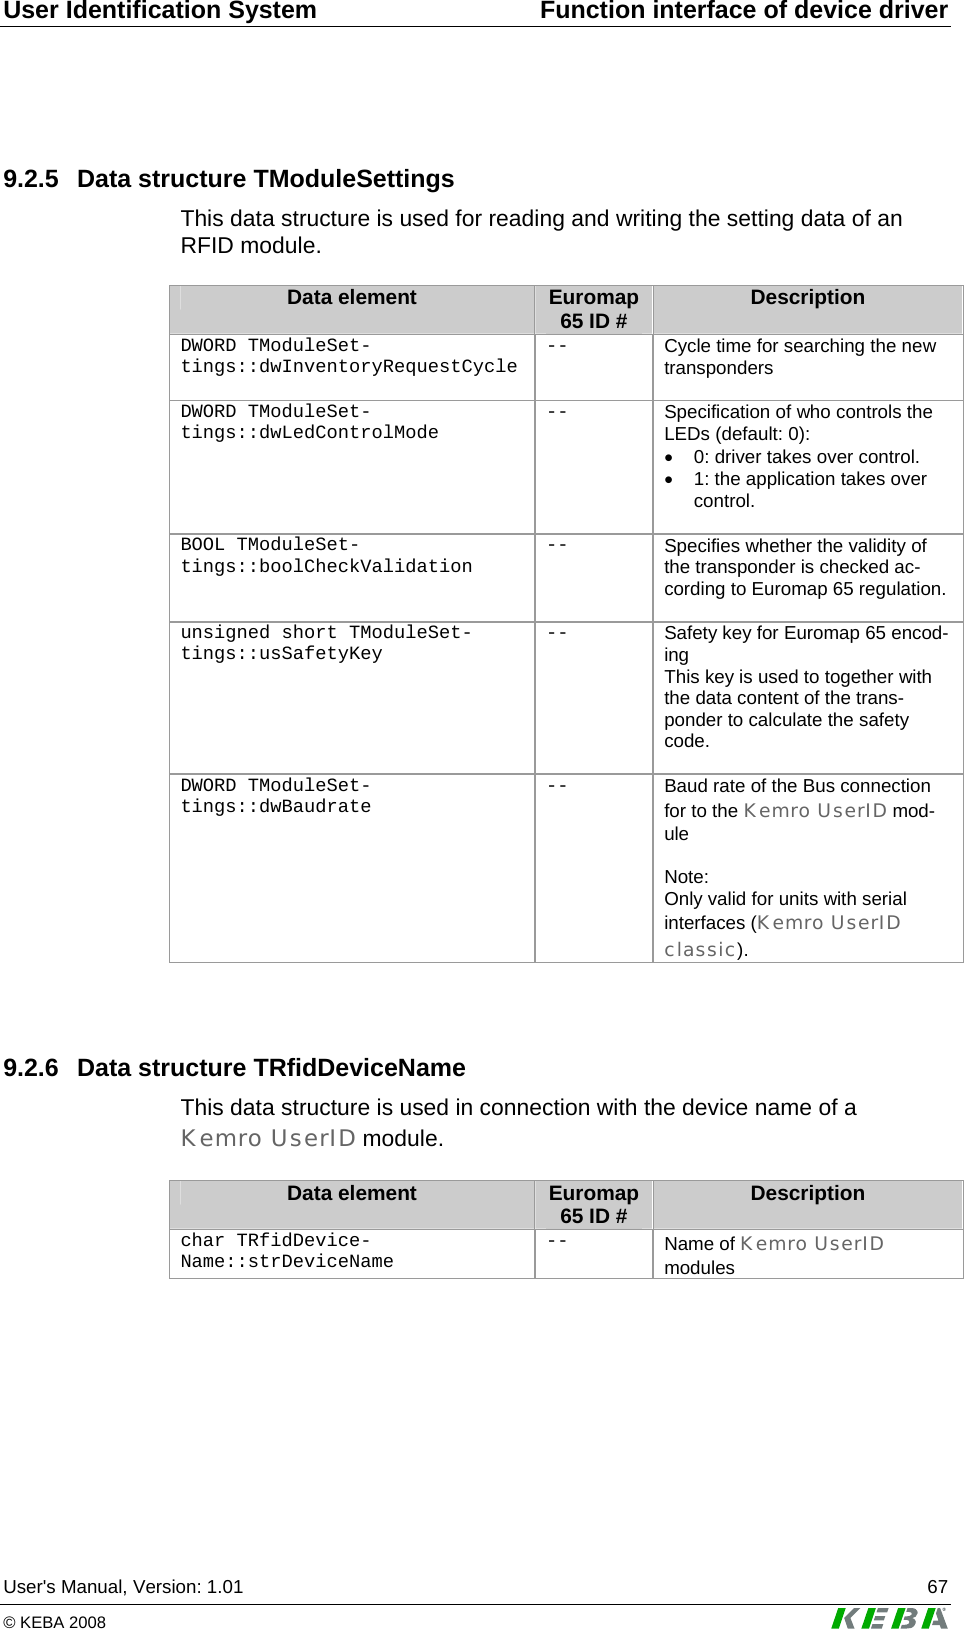 User Identification System  Function interface of device driver User&apos;s Manual, Version: 1.01  67 © KEBA 2008   9.2.5  Data structure TModuleSettings This data structure is used for reading and writing the setting data of an RFID module.  Data element  Euromap 65 ID #  Description DWORD TModuleSet-tings::dwInventoryRequestCycle --  Cycle time for searching the new transponders  DWORD TModuleSet-tings::dwLedControlMode --  Specification of who controls the LEDs (default: 0): •  0: driver takes over control. •  1: the application takes over control.    BOOL TModuleSet-tings::boolCheckValidation --  Specifies whether the validity of the transponder is checked ac-cording to Euromap 65 regulation. unsigned short TModuleSet-tings::usSafetyKey --  Safety key for Euromap 65 encod-ing This key is used to together with the data content of the trans-ponder to calculate the safety code.  DWORD TModuleSet-tings::dwBaudrate --  Baud rate of the Bus connection for to the Kemro UserID mod-ule  Note: Only valid for units with serial interfaces (Kemro UserID classic).   9.2.6  Data structure TRfidDeviceName This data structure is used in connection with the device name of a Kemro UserID module.  Data element  Euromap 65 ID #  Description char TRfidDevice-Name::strDeviceName --  Name of Kemro UserID modules  